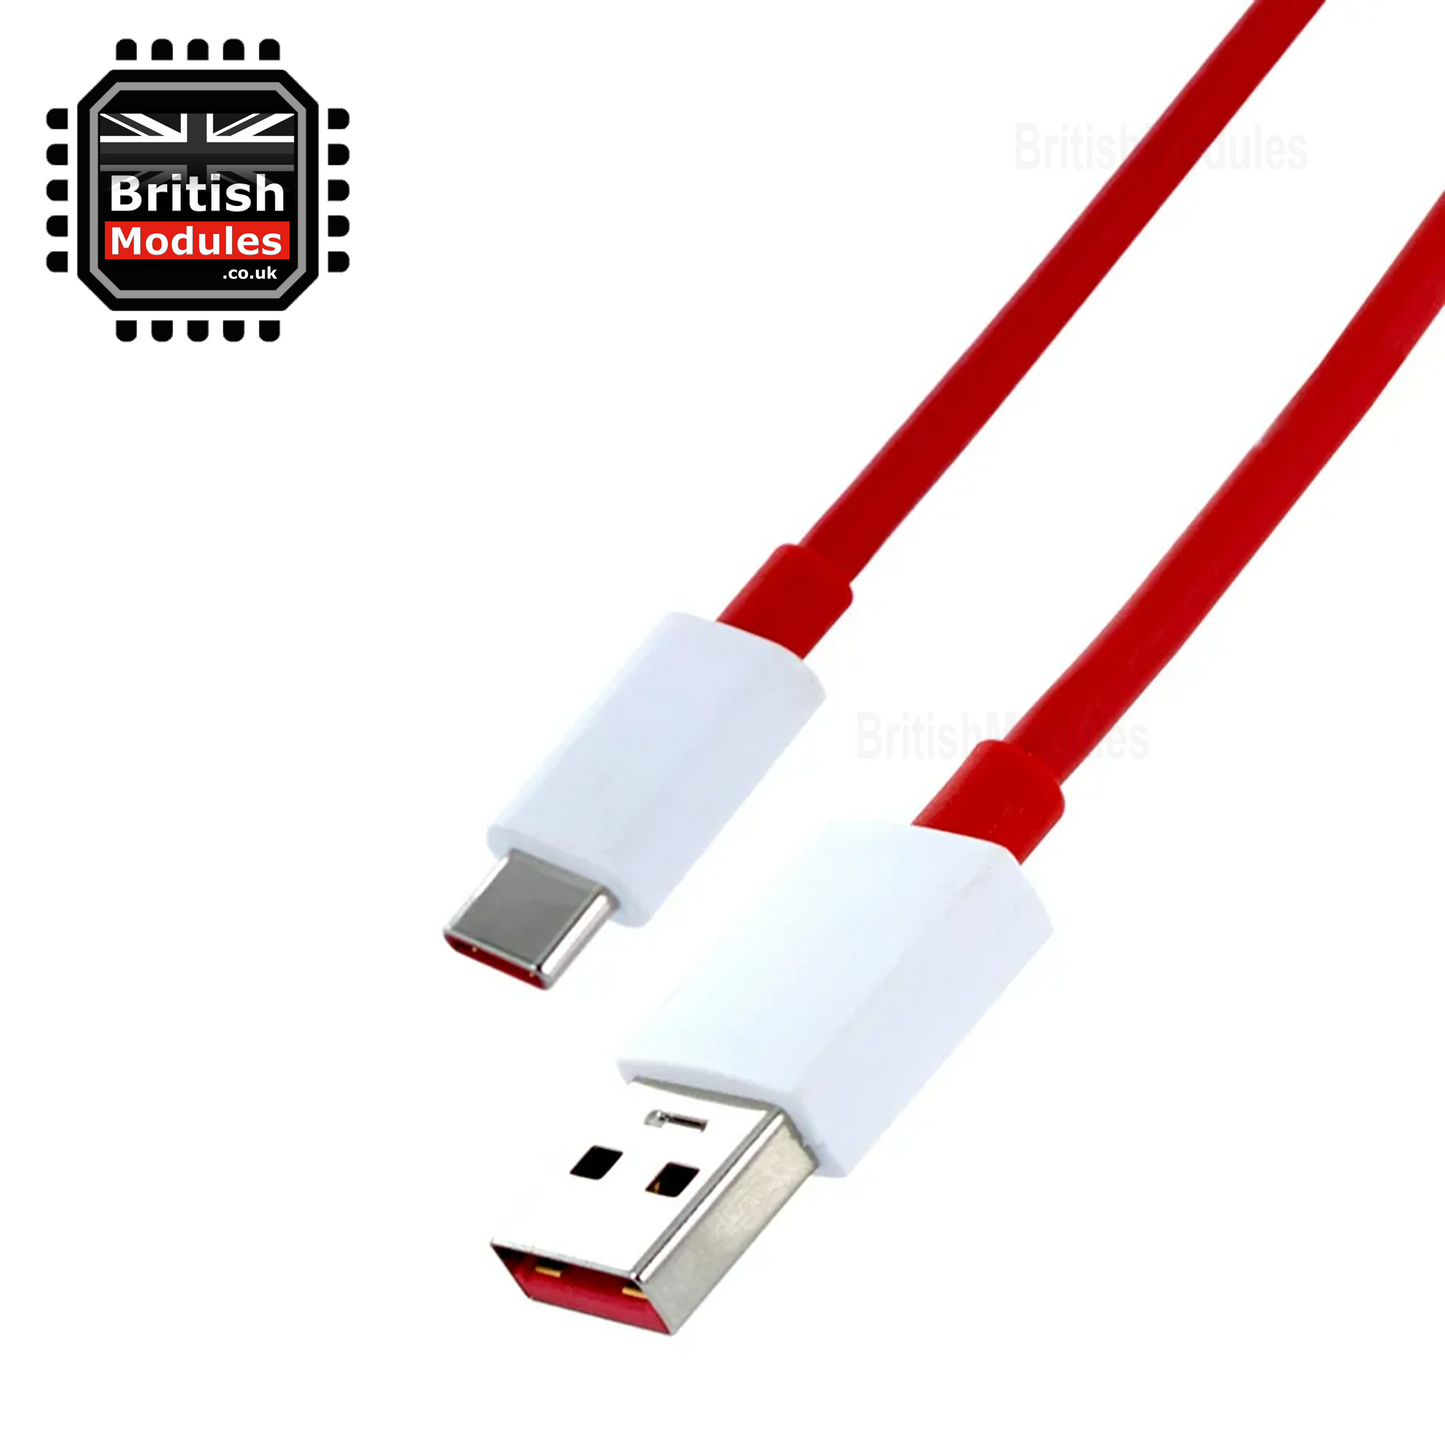 2M OnePlus SUPERVOOC / Warp Charge Type-C Cable USB Fast Charger 6.5A 65W 6 7T 7 Pro 8 8T 9 Nord